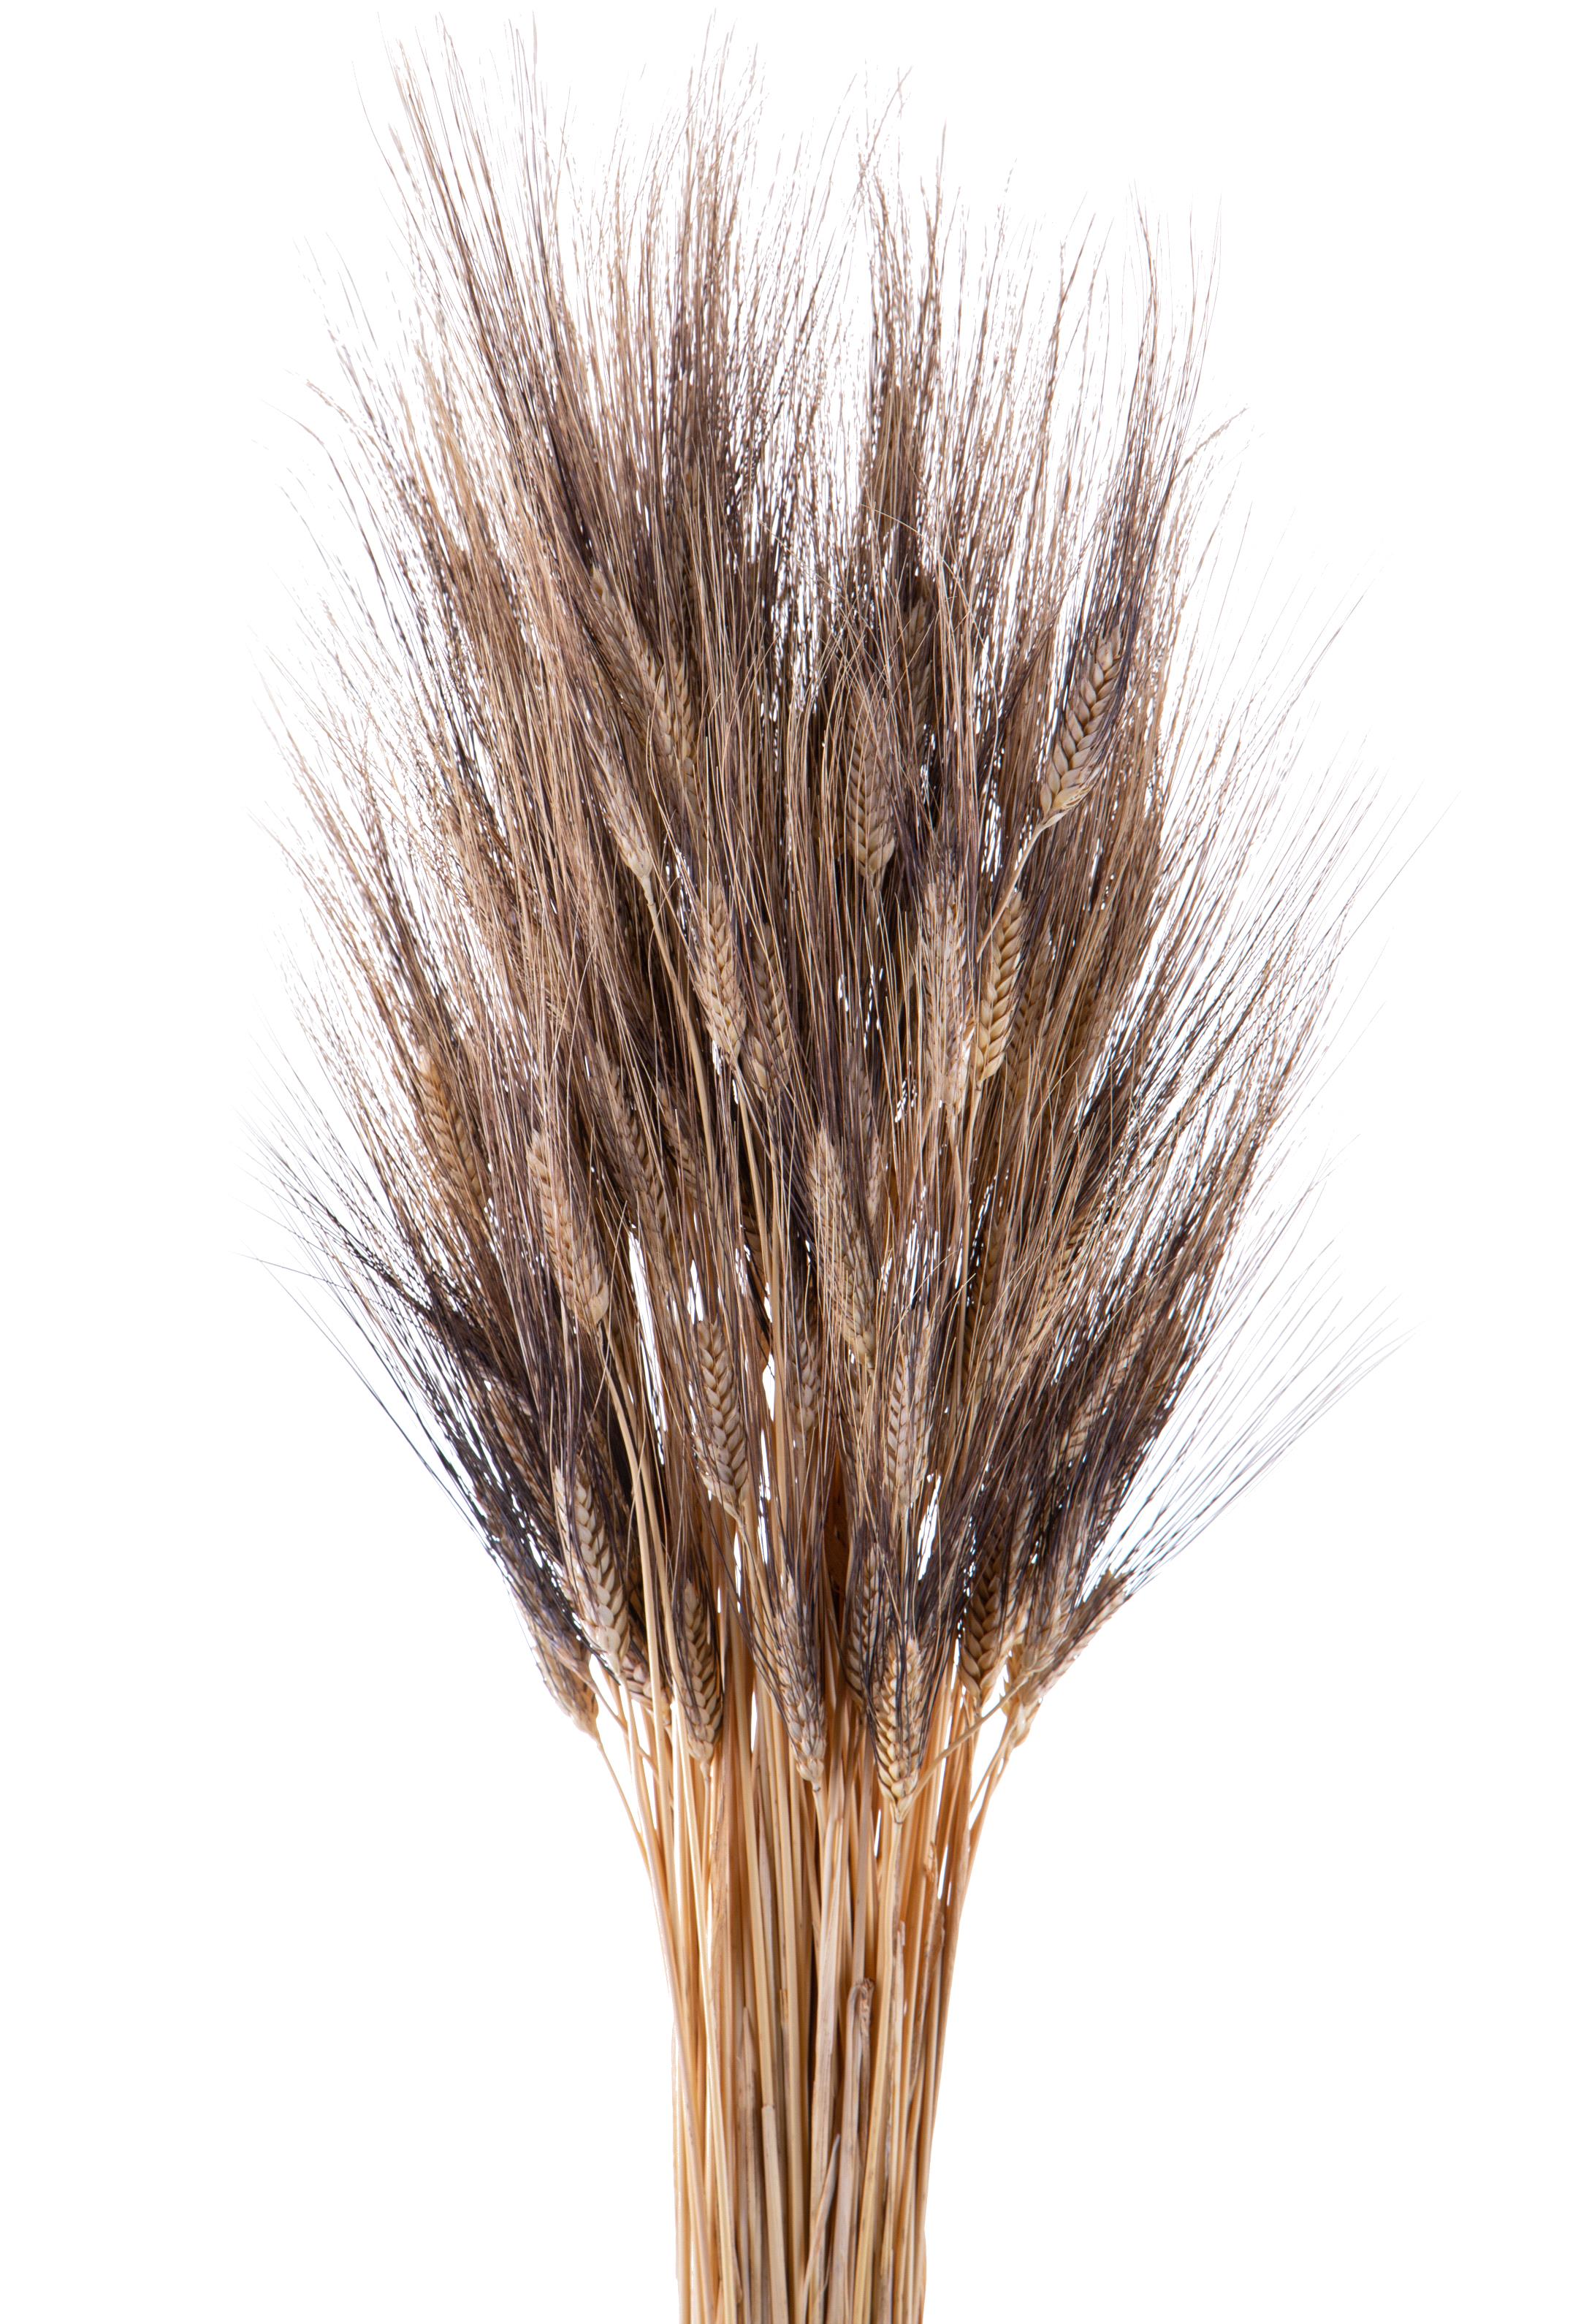 NATURAL PRODUCTS DRIED FLOWERS AND ERBS, NATURAL GRASS, GRANO TRITICUM 100 PZ CA NERO NO SACCO